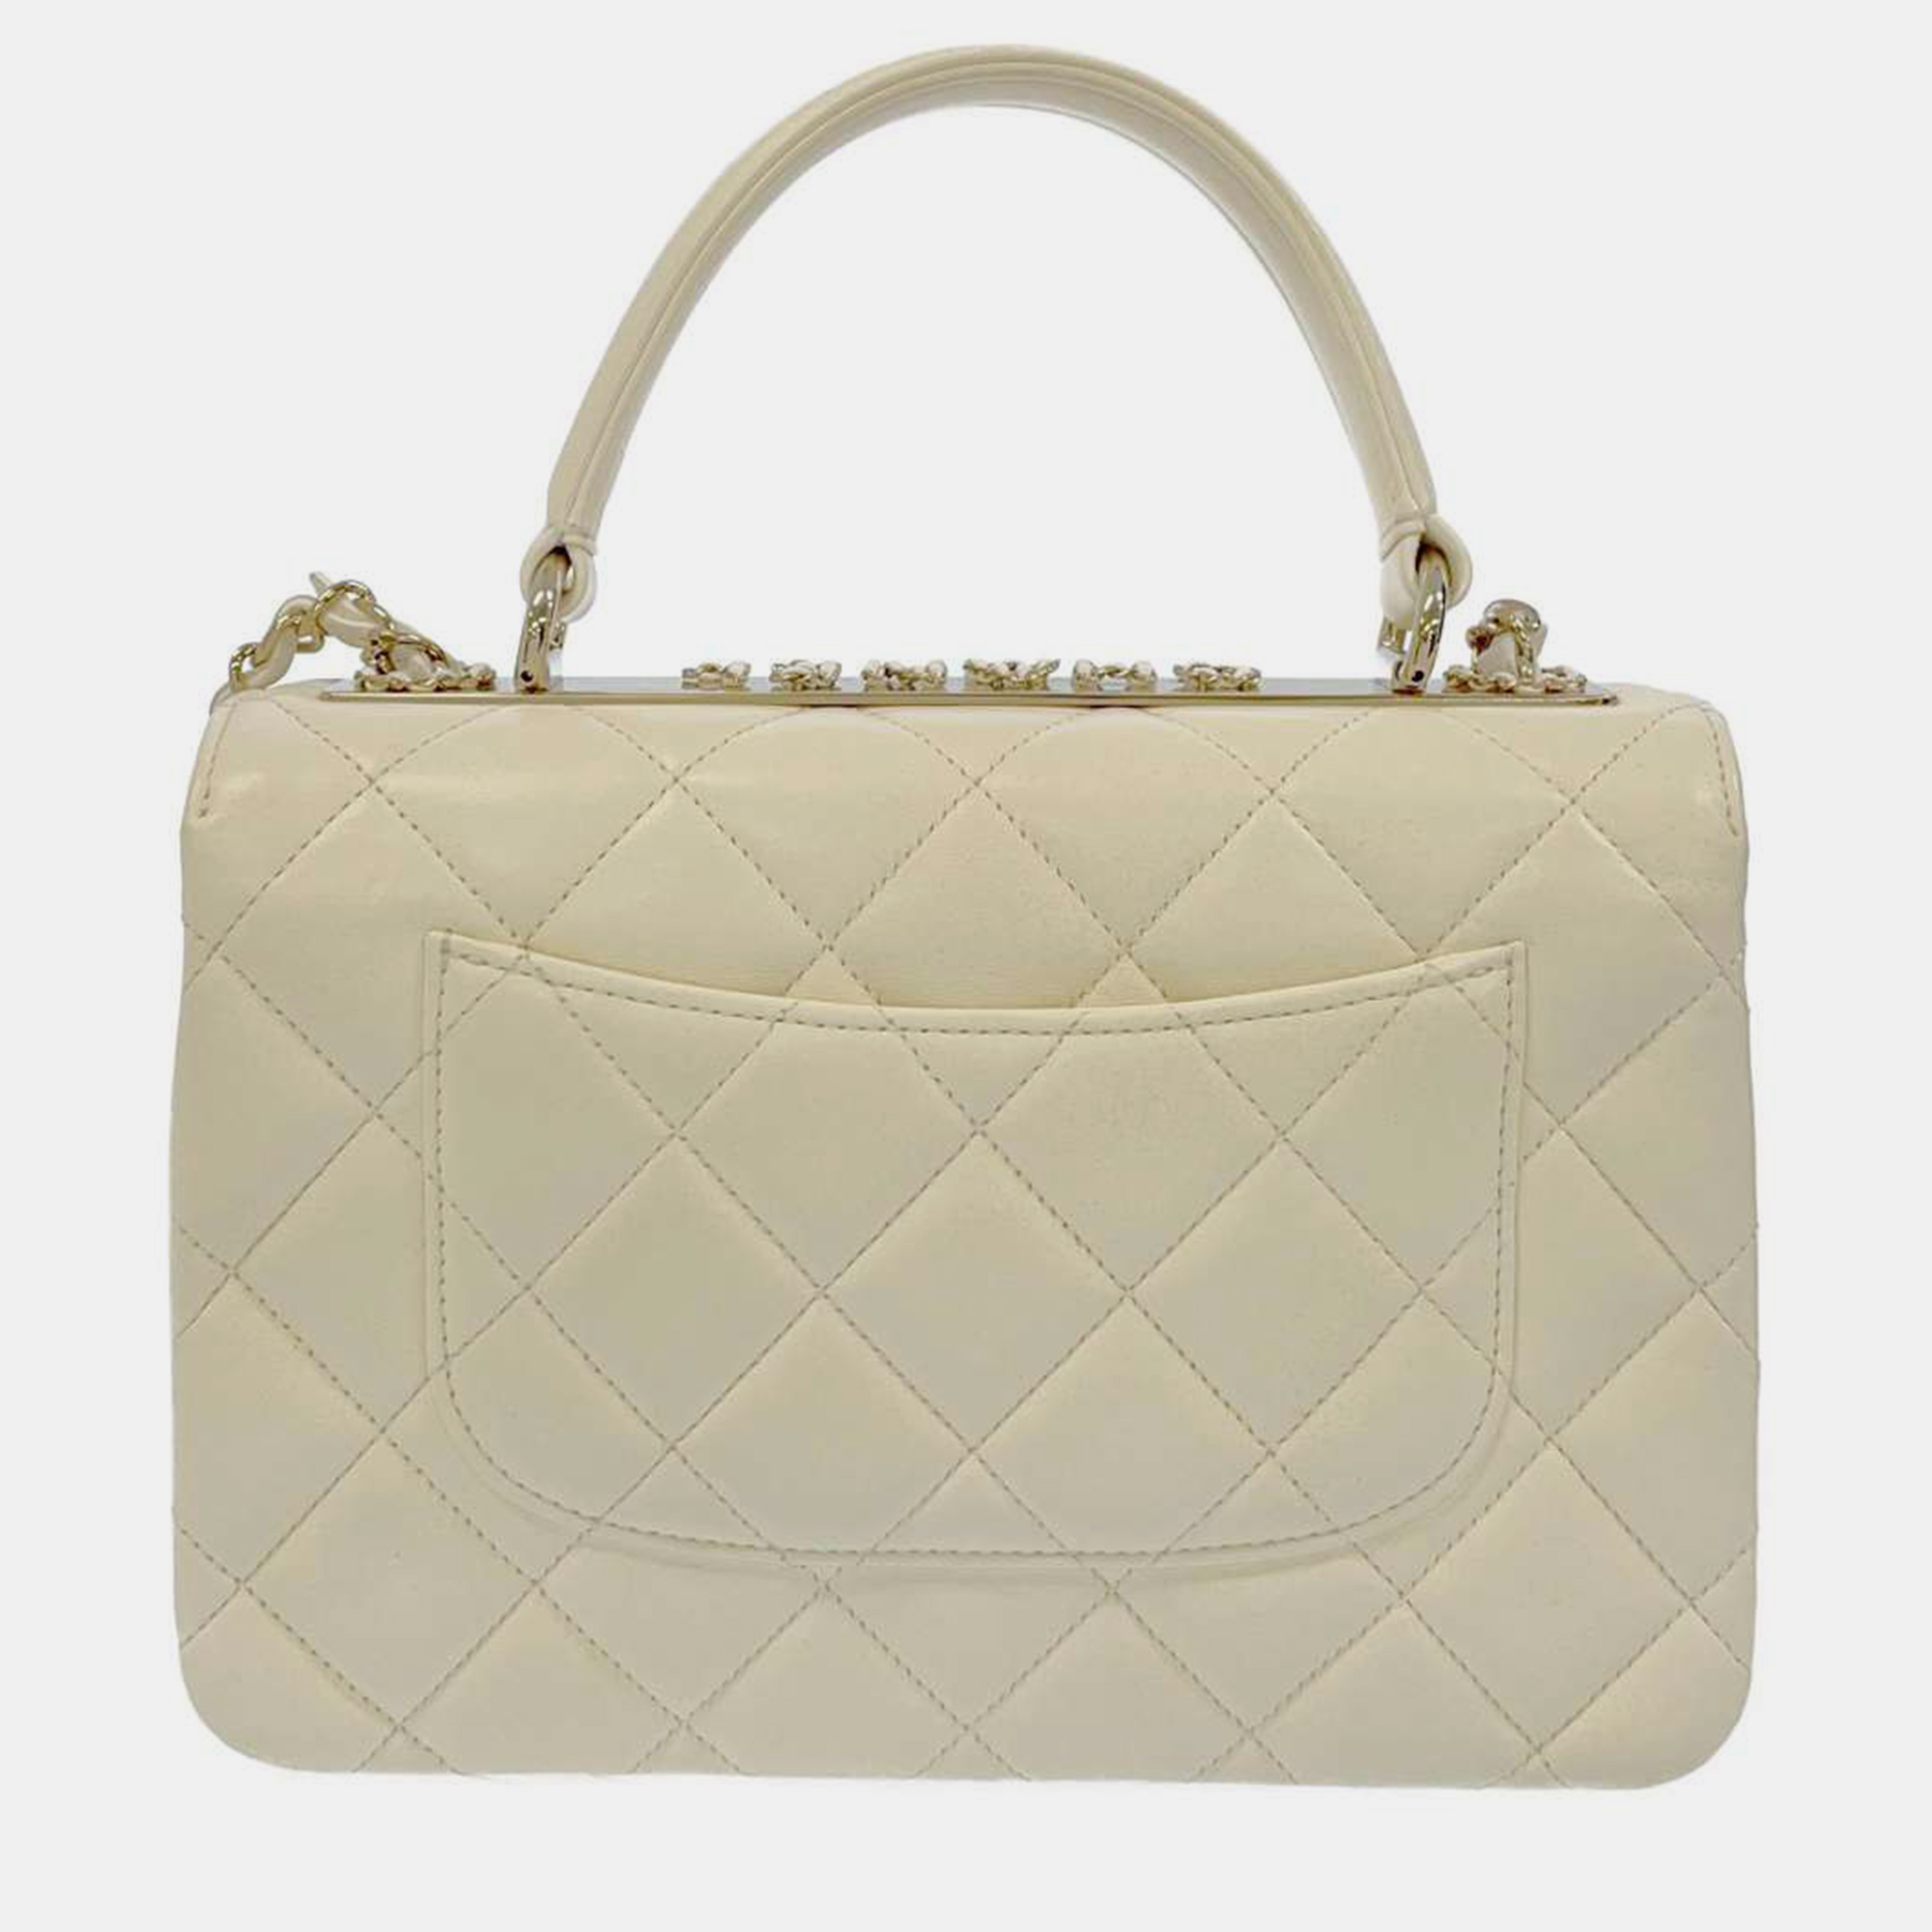 Chanel White Leather Small Trendy CC Shoulder Bag